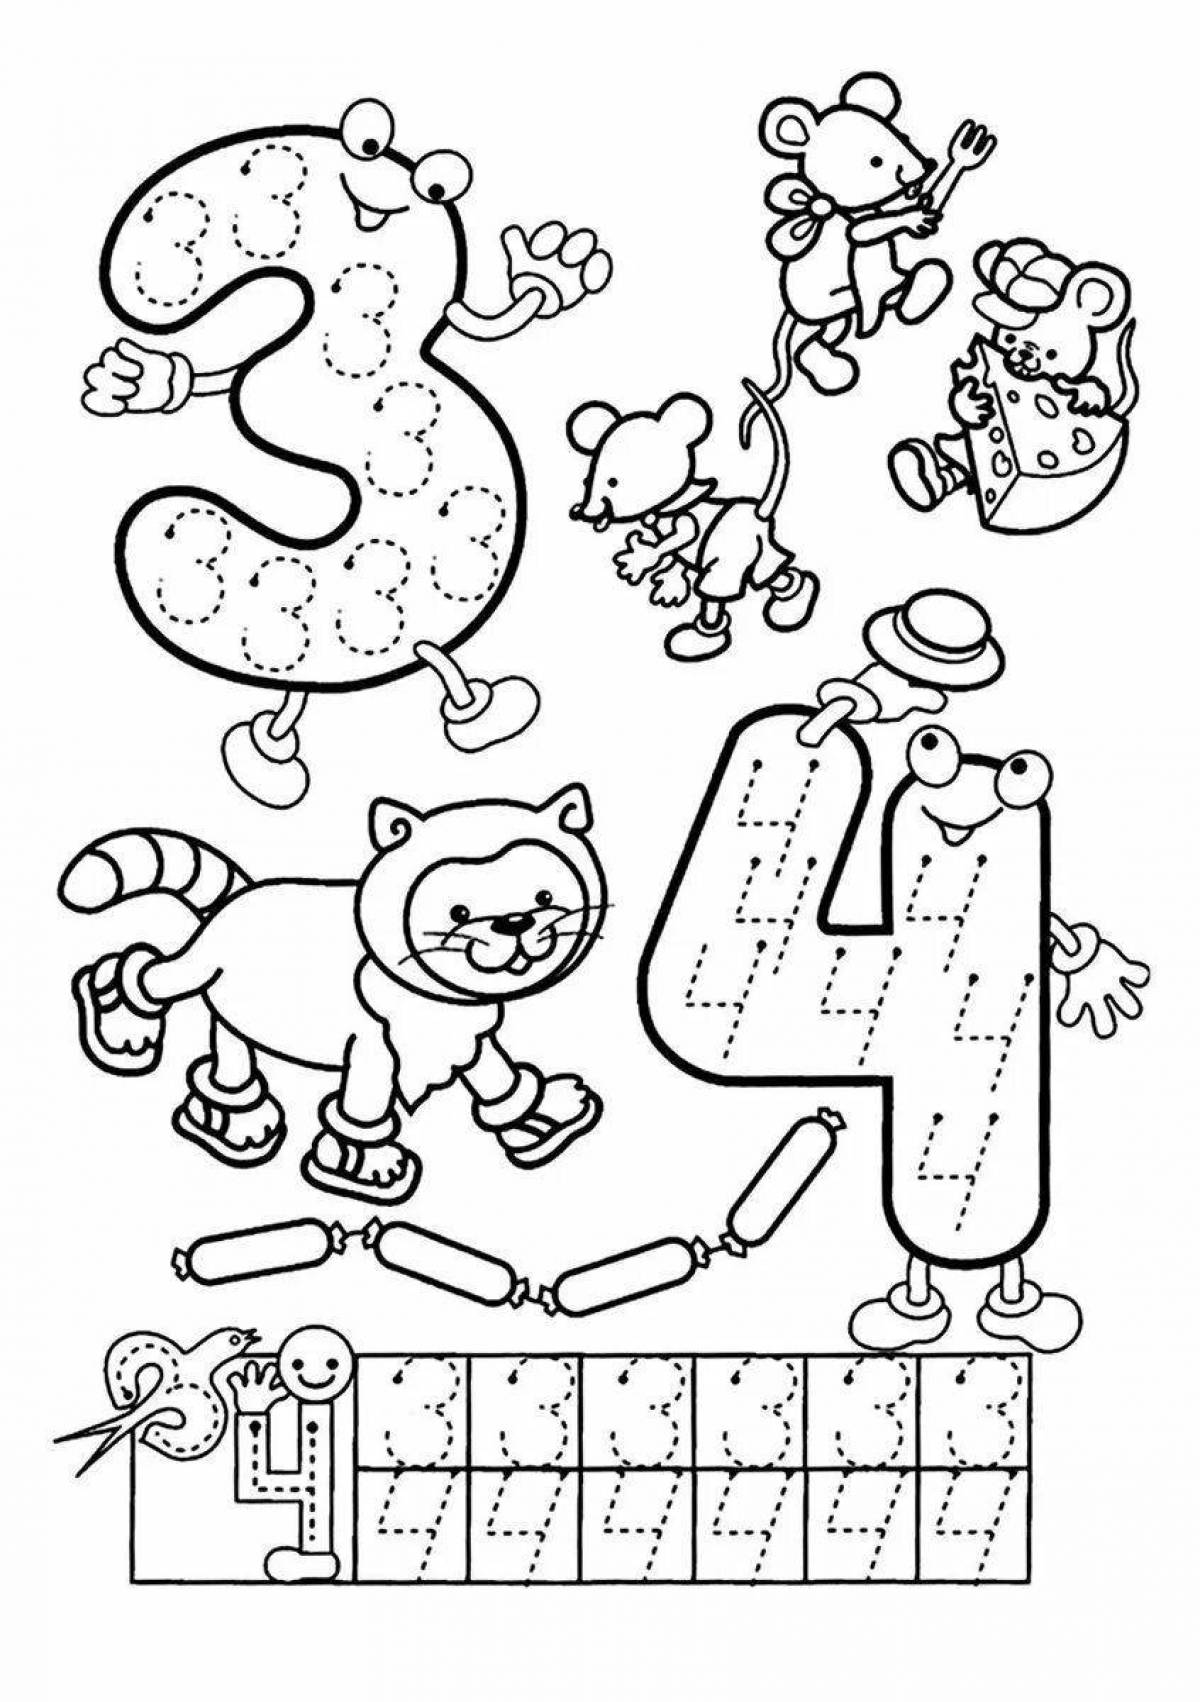 Charming coloring page number 5 spelling